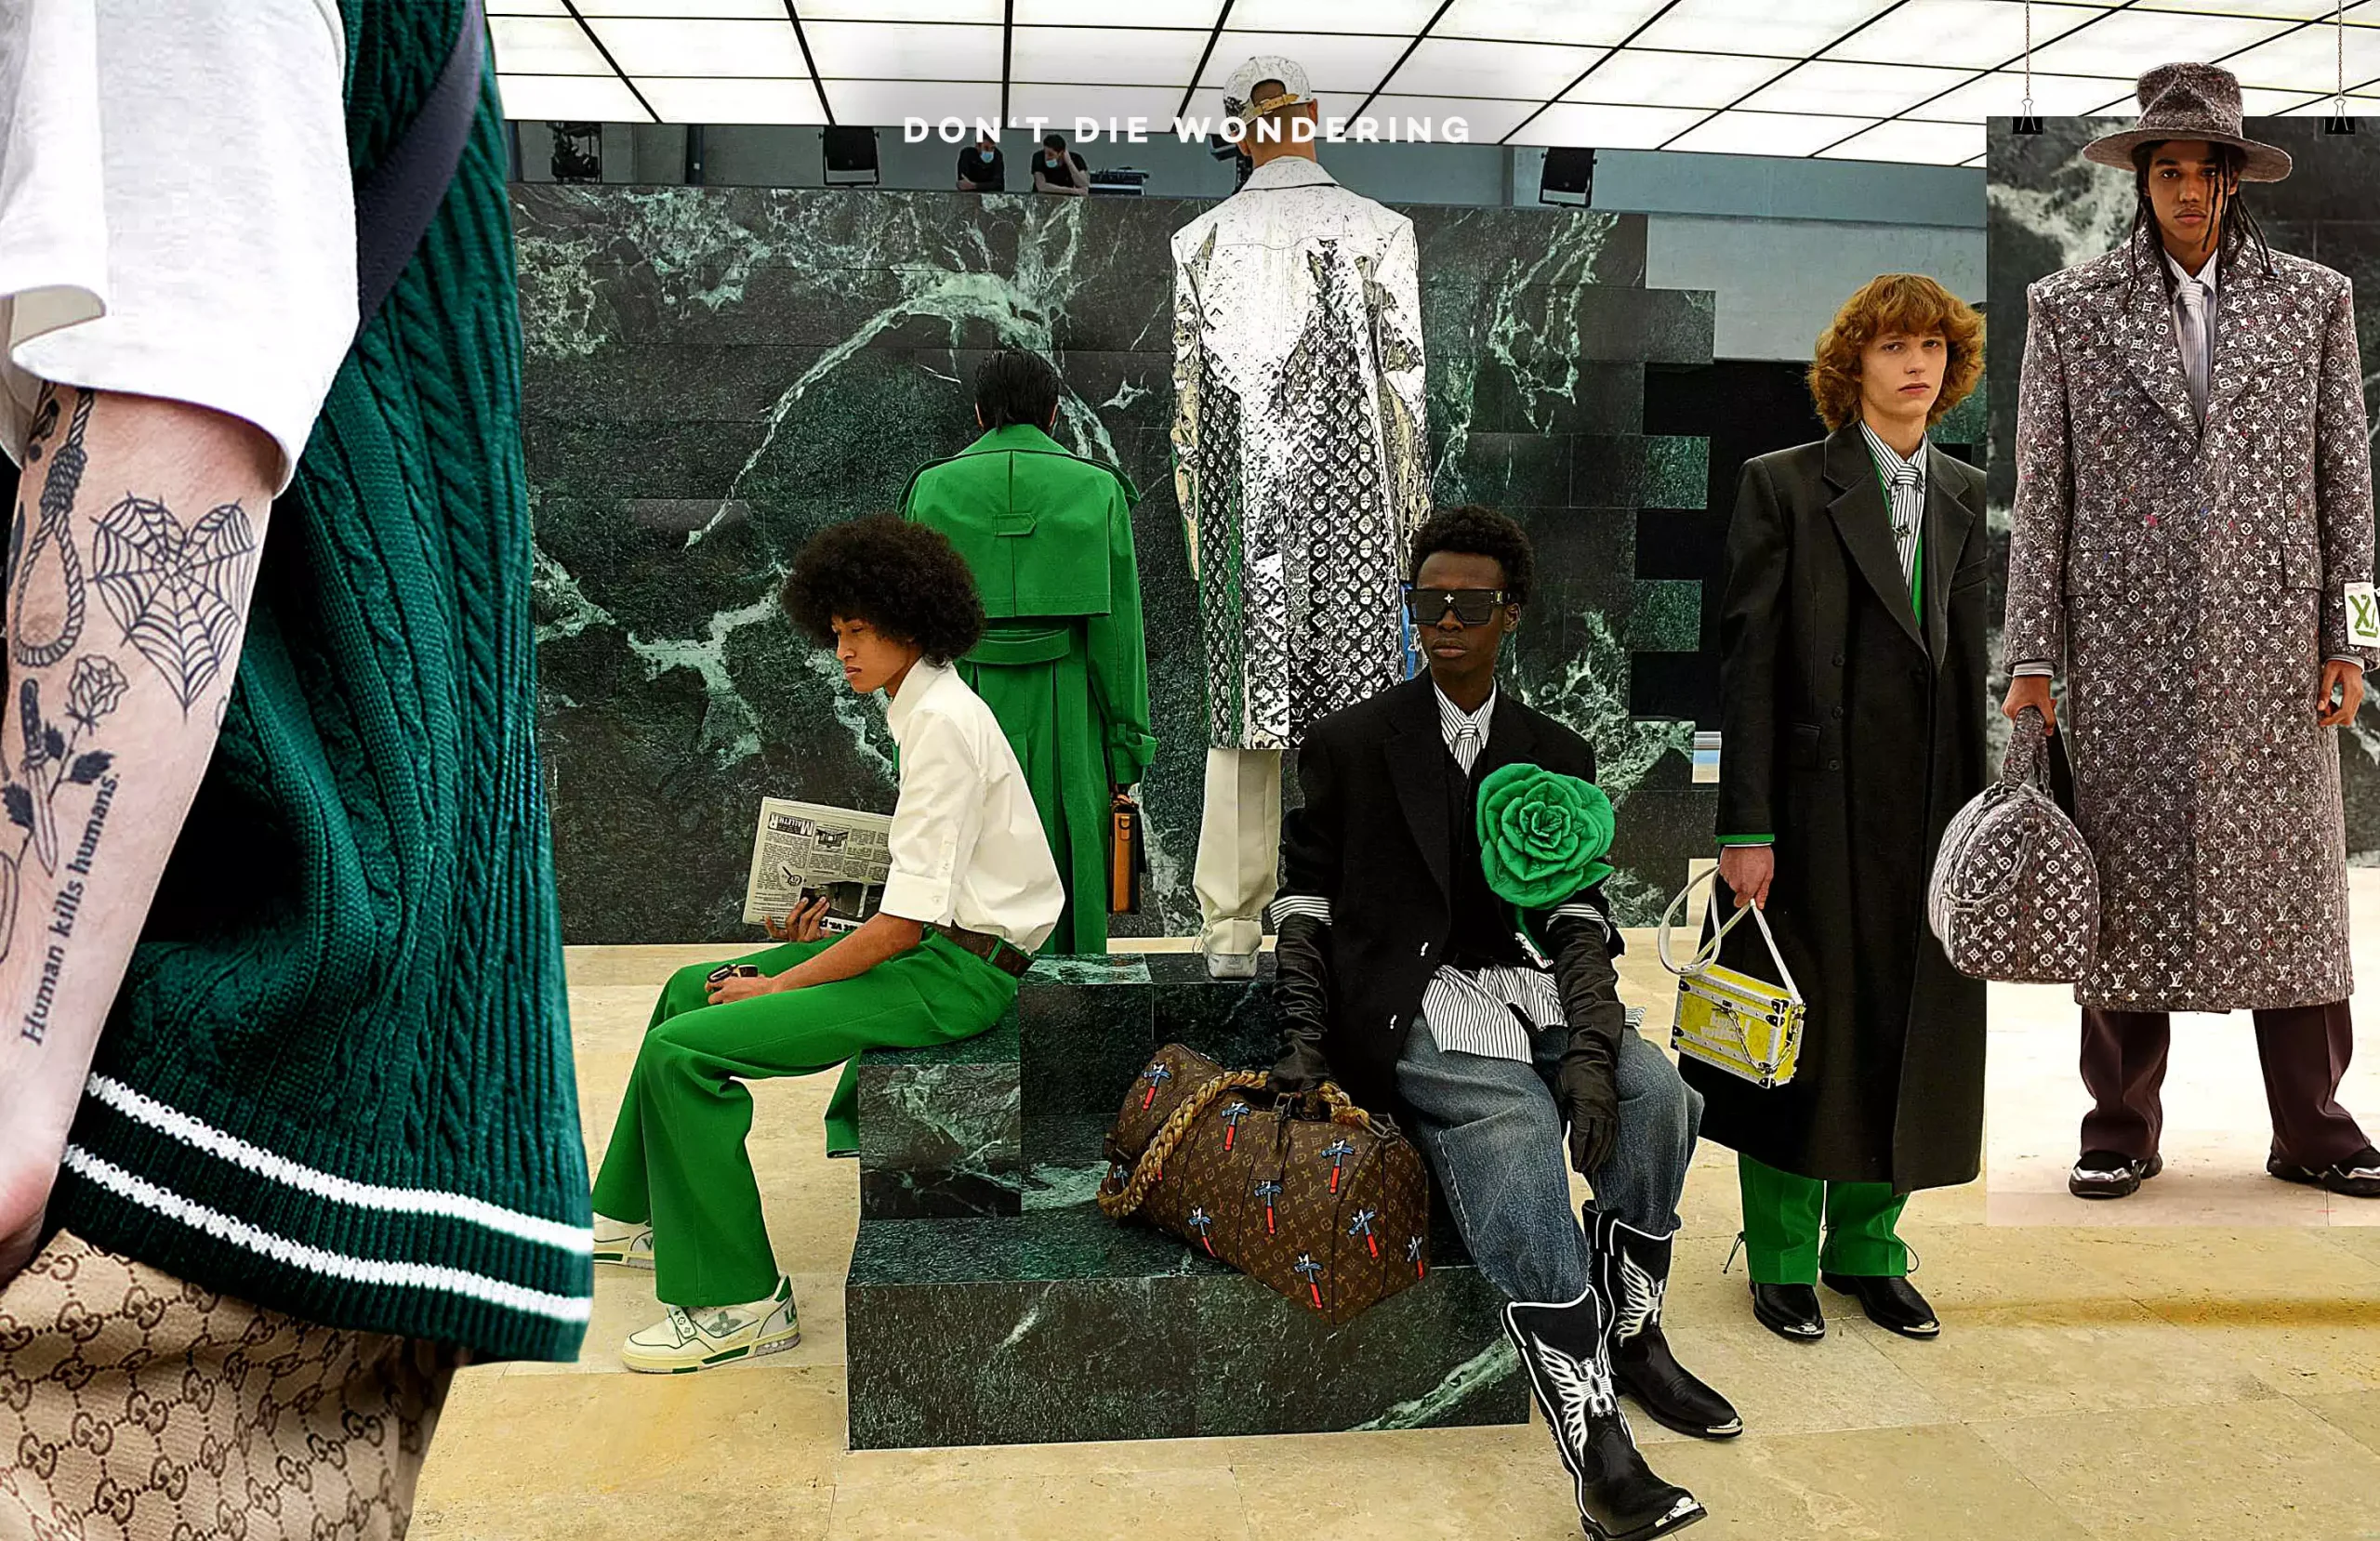 Instagram: The Louis Vuitton Catwalk records the hugely